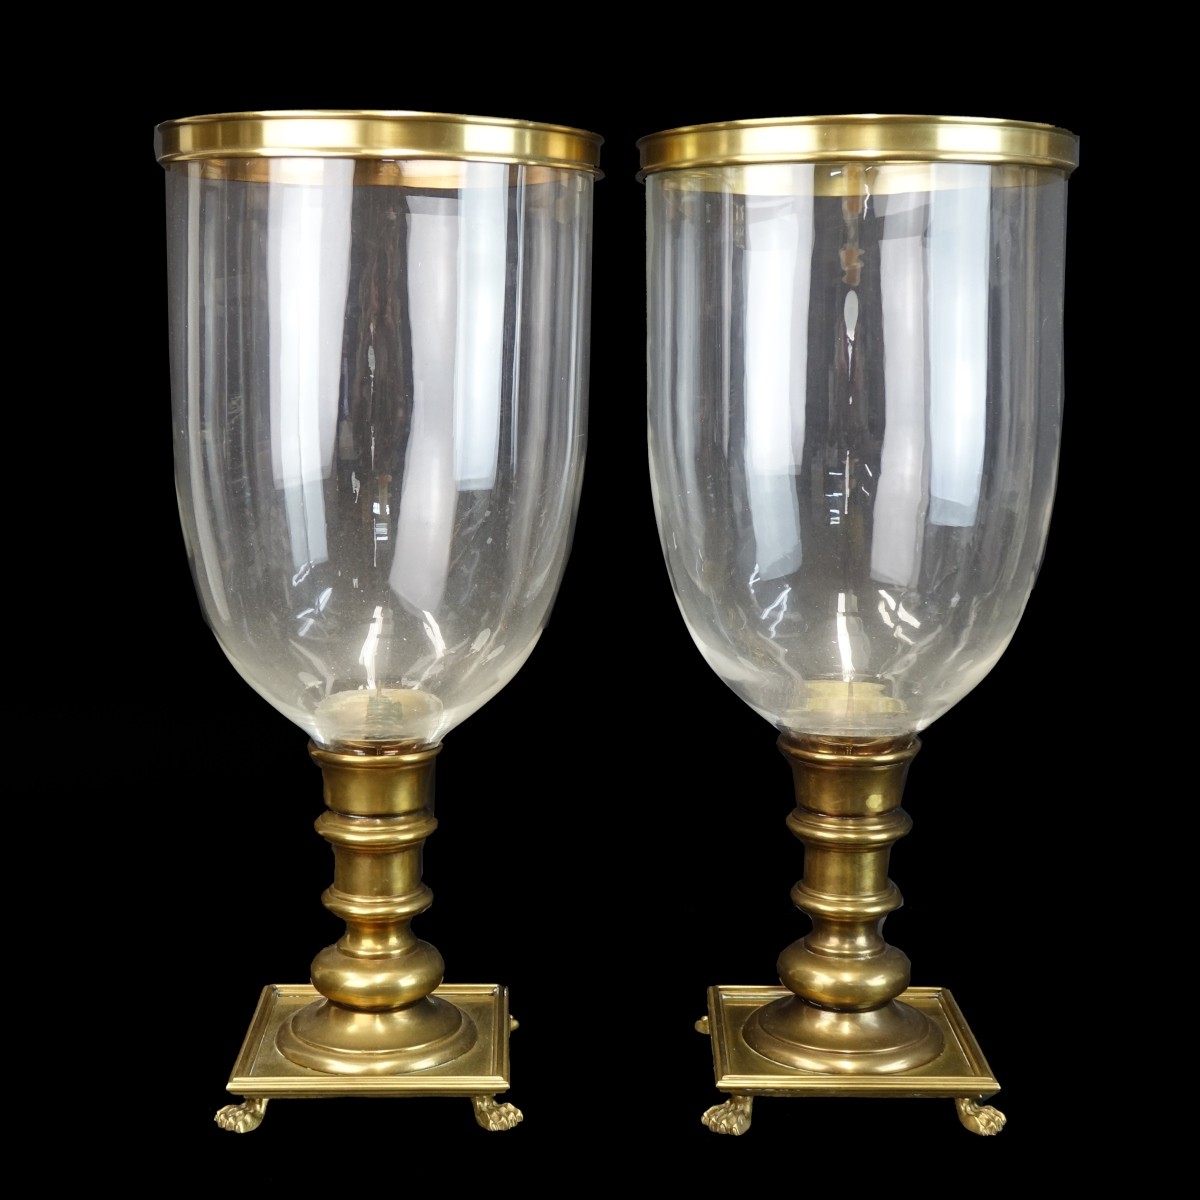 Pair of Decorative Crafts Inc. Candle Holders